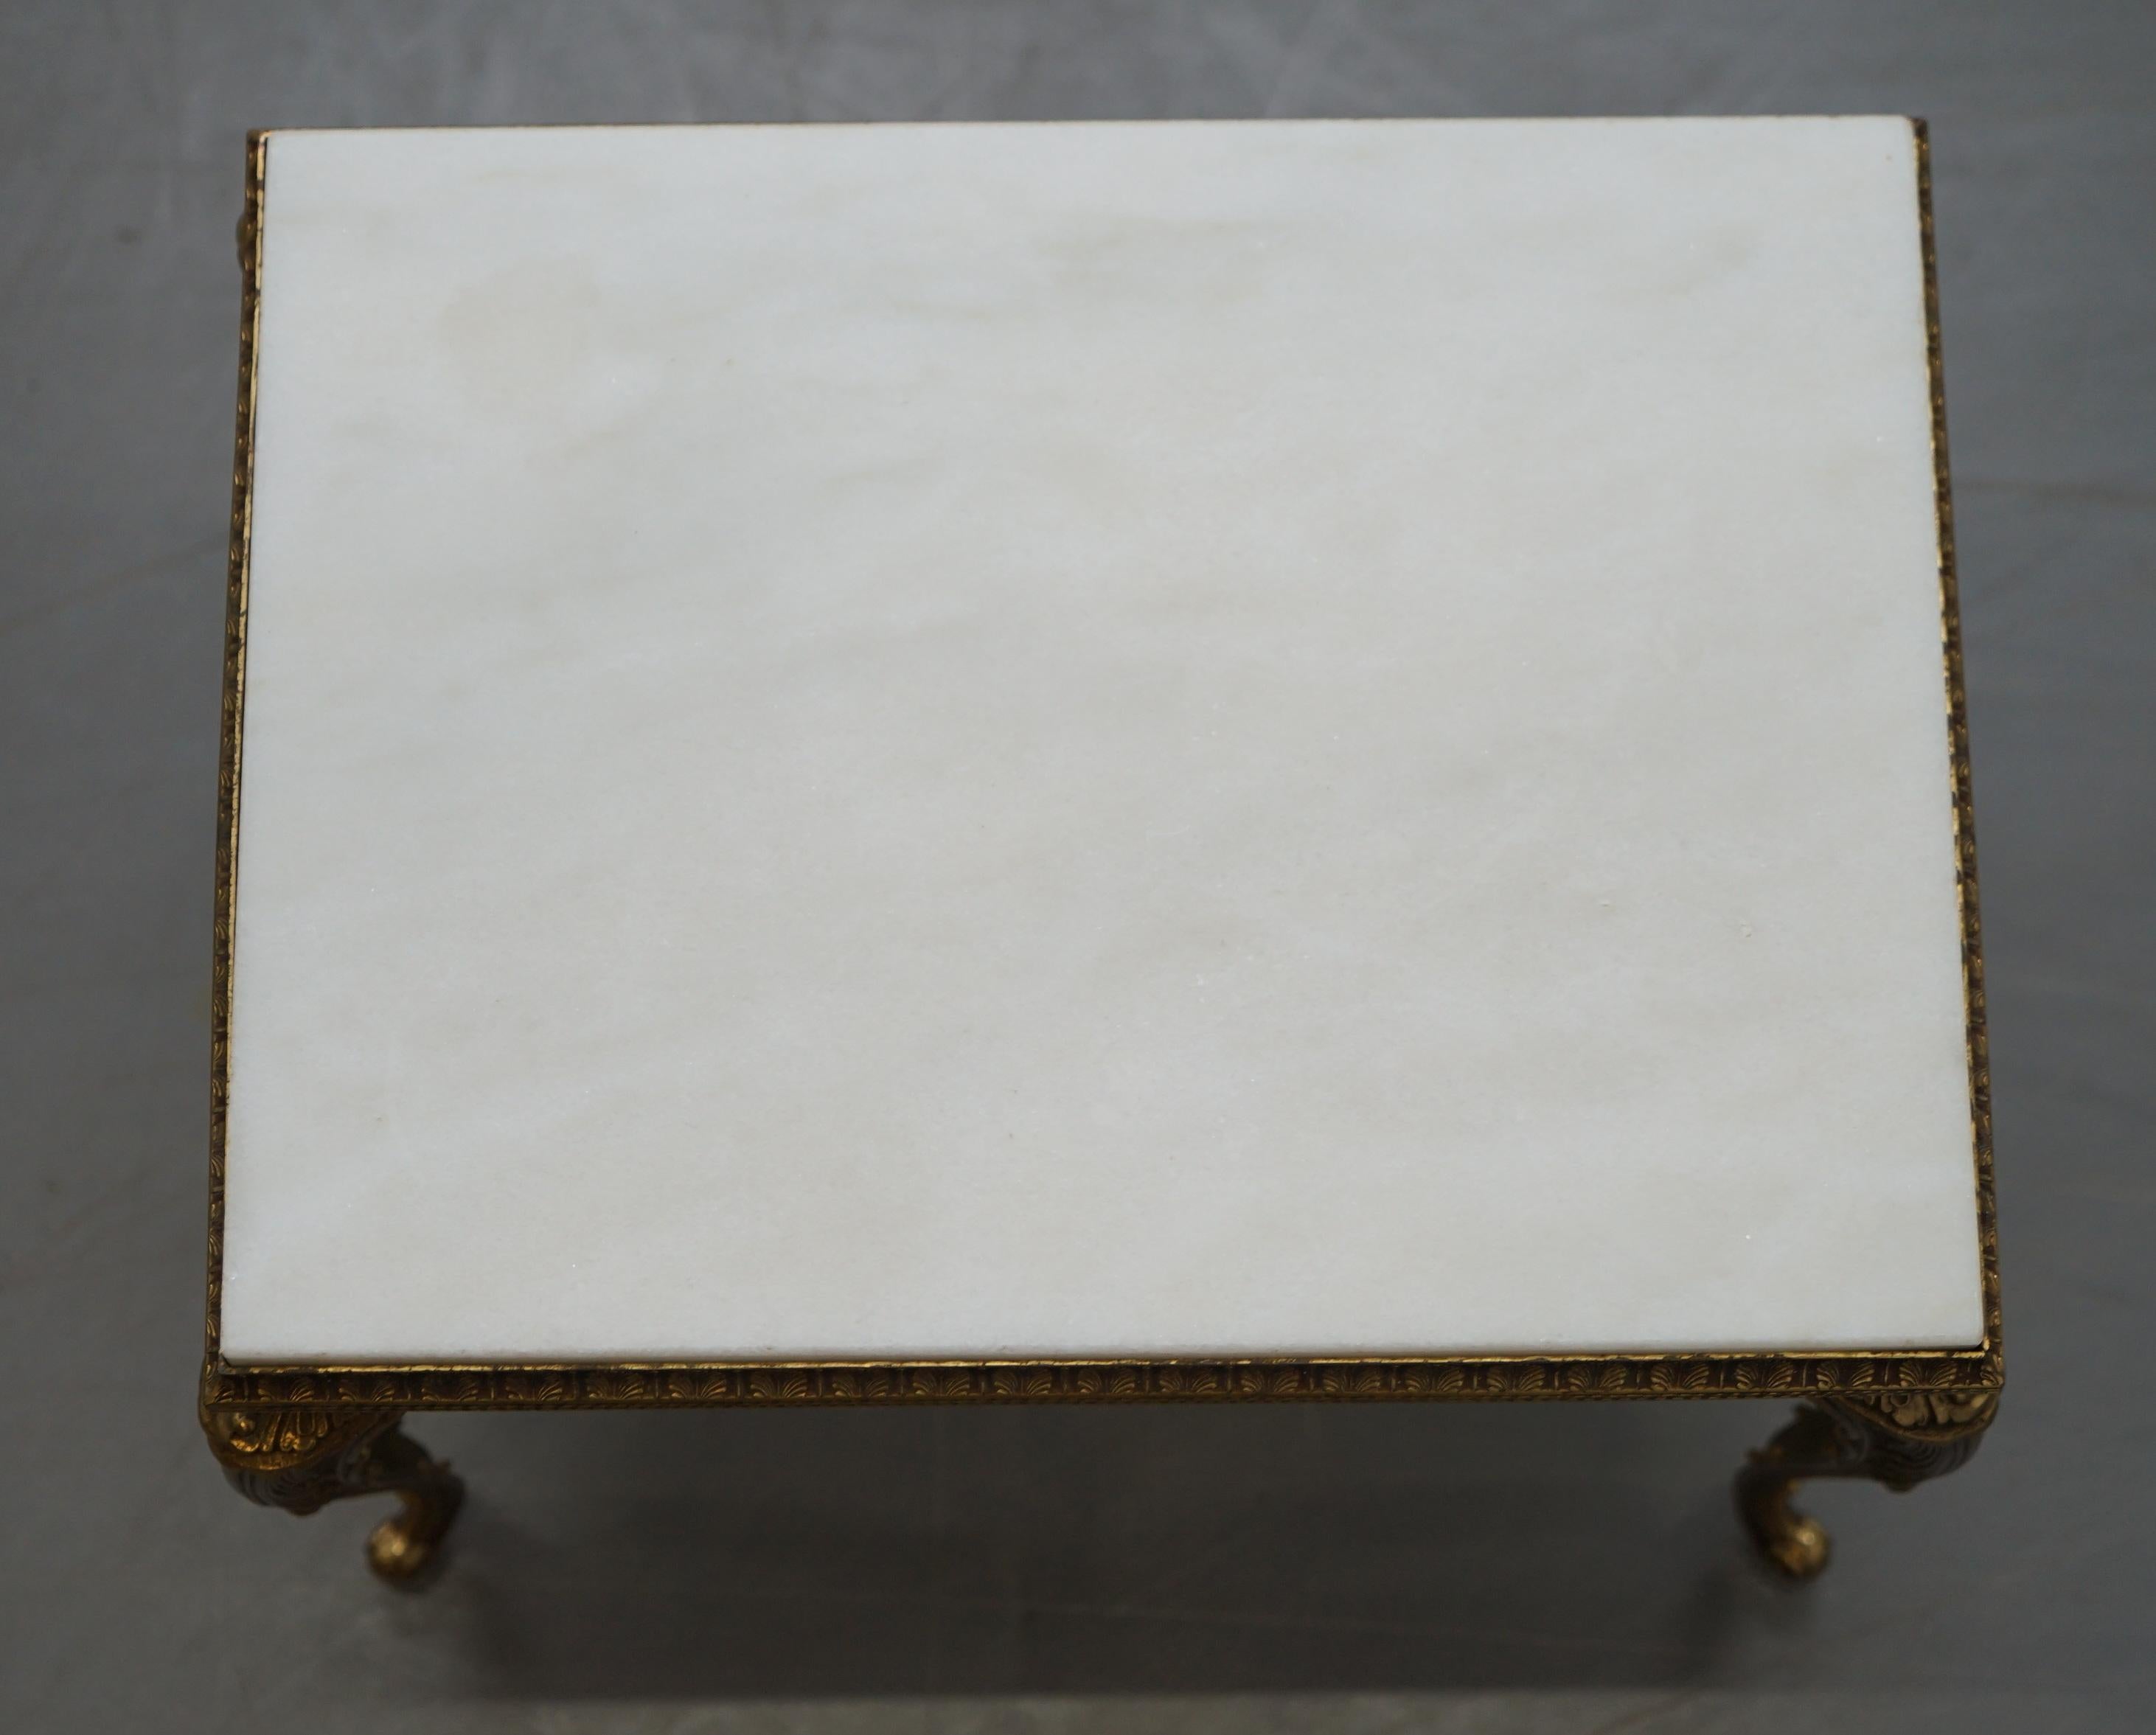 Pair of Lovely circa 1900 French Brass Framed Side Tables Italian Marble Tops For Sale 3